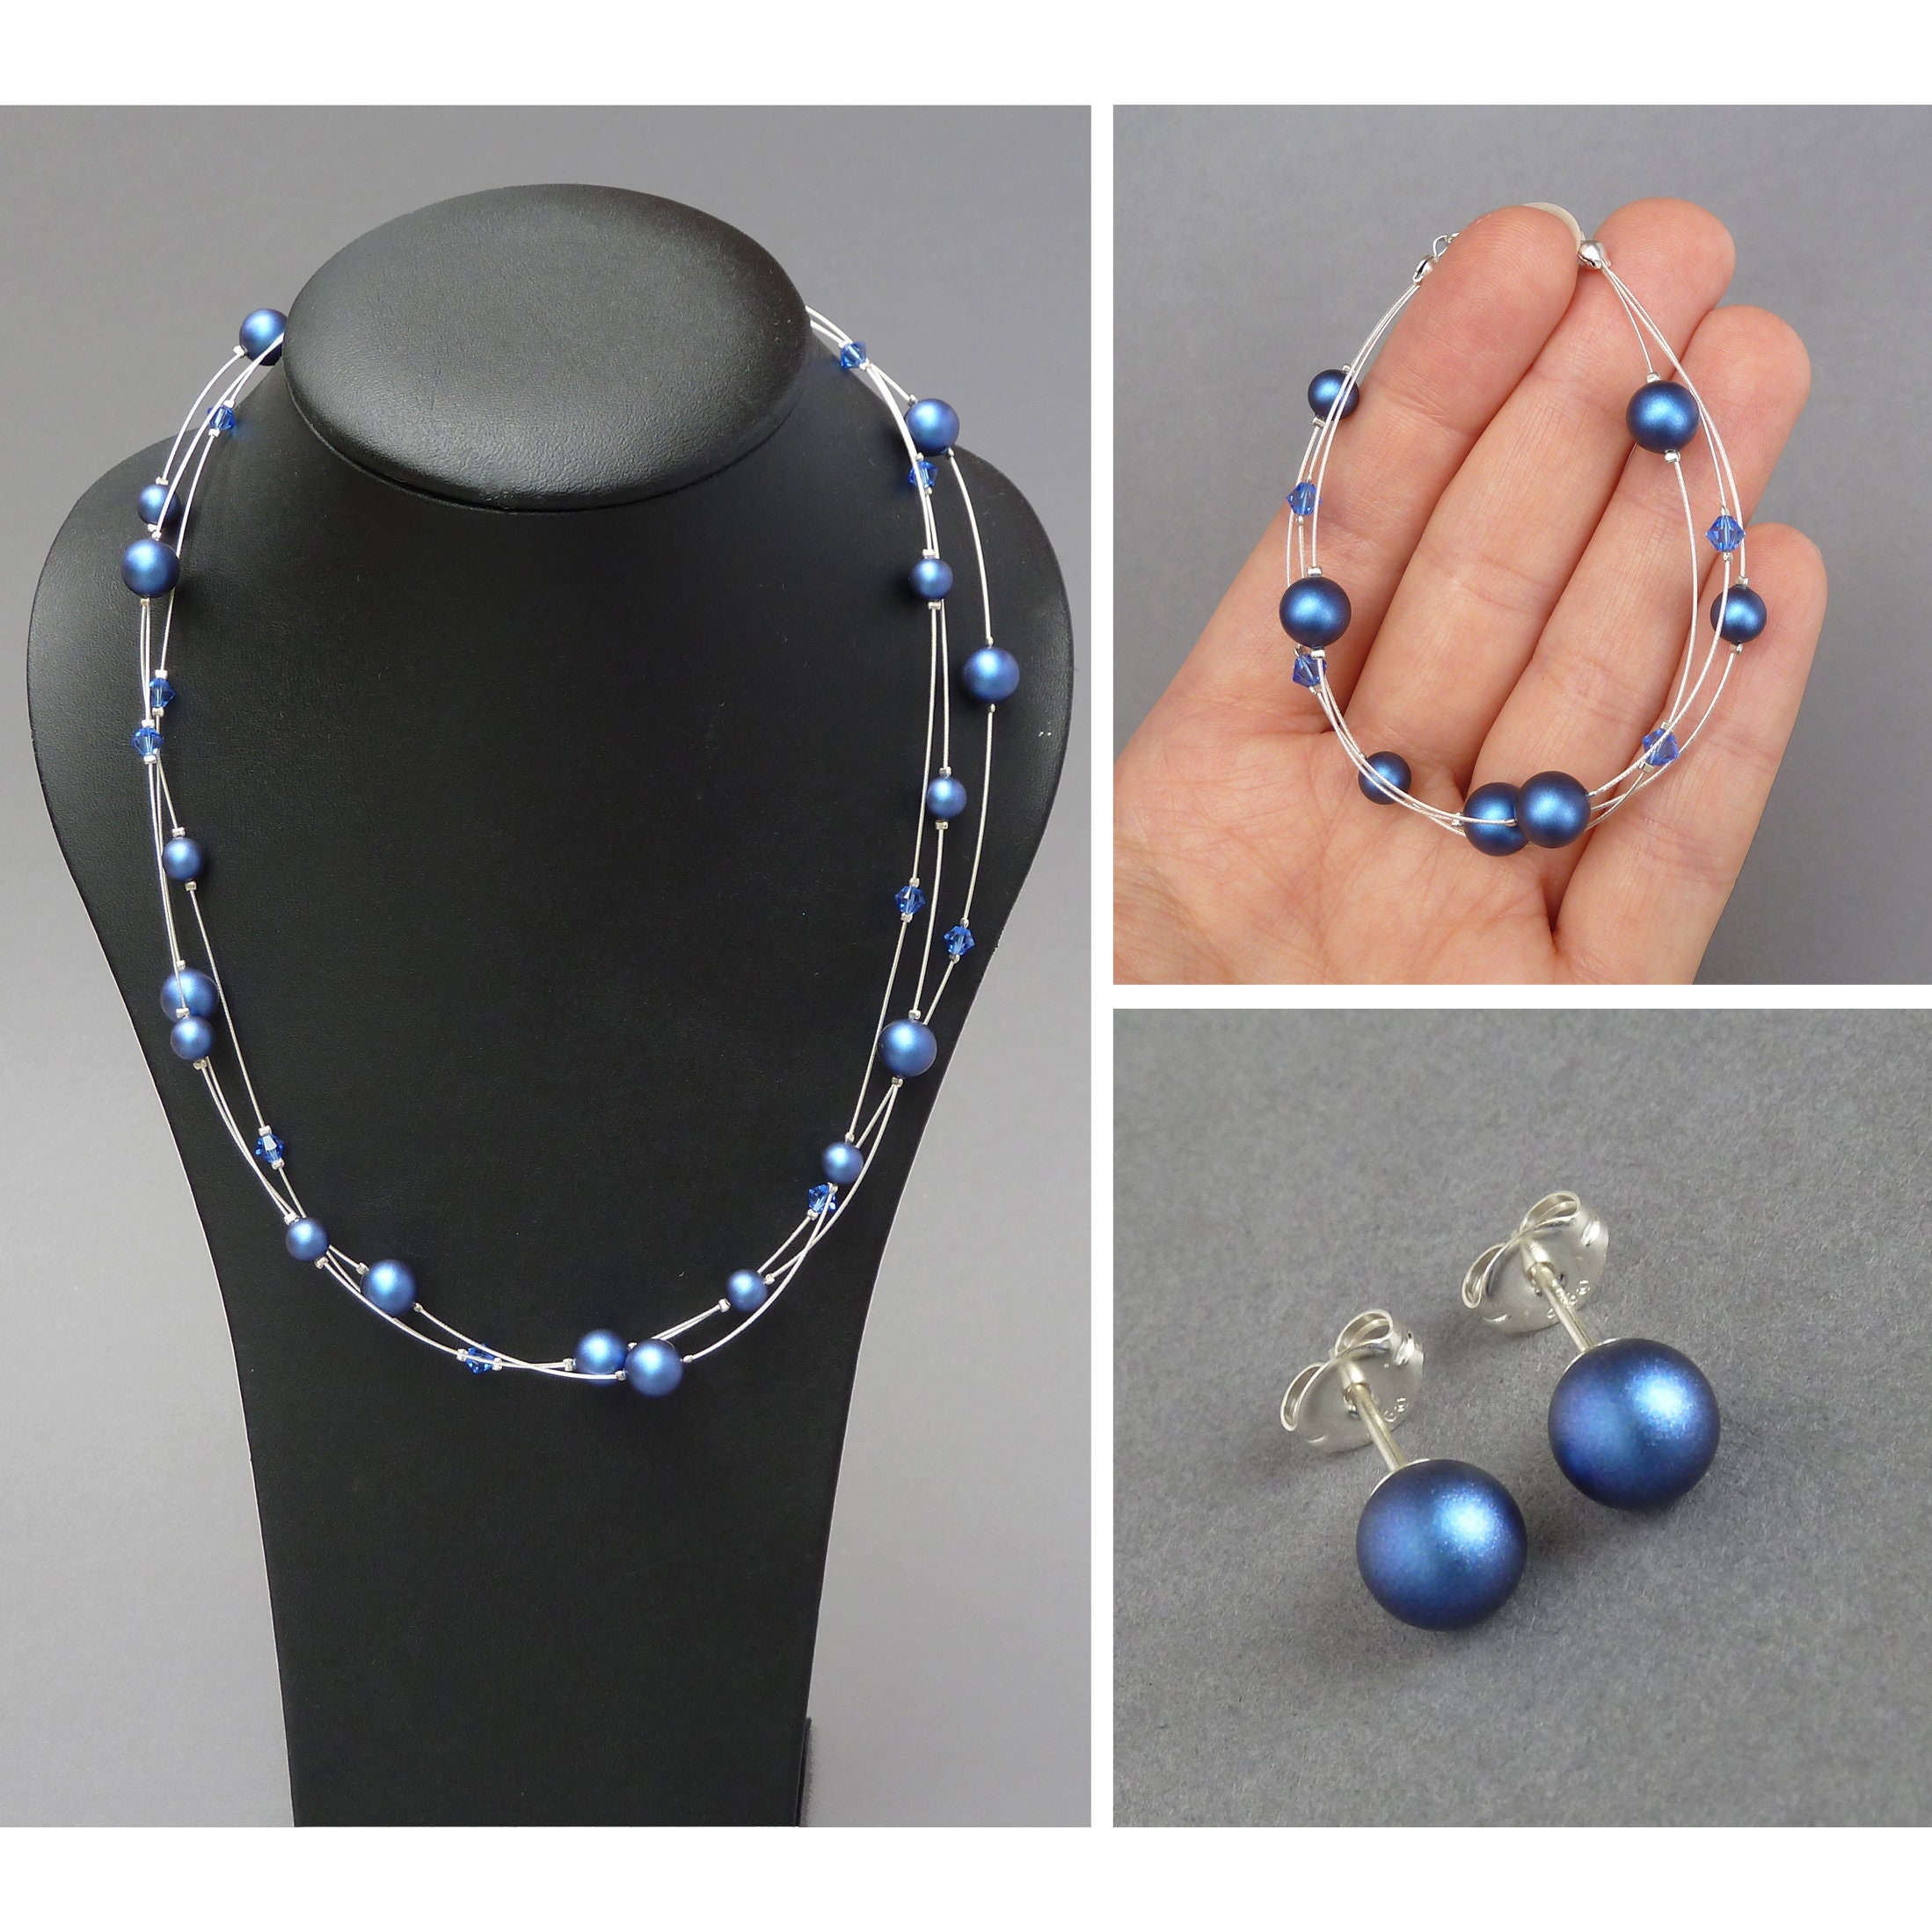 Amazon.com: Jessica Luu Jewelry Sterling Silver 12mm Navy Blue Pearl  Solitaire Necklace Optional Earrings Handmade : Handmade Products